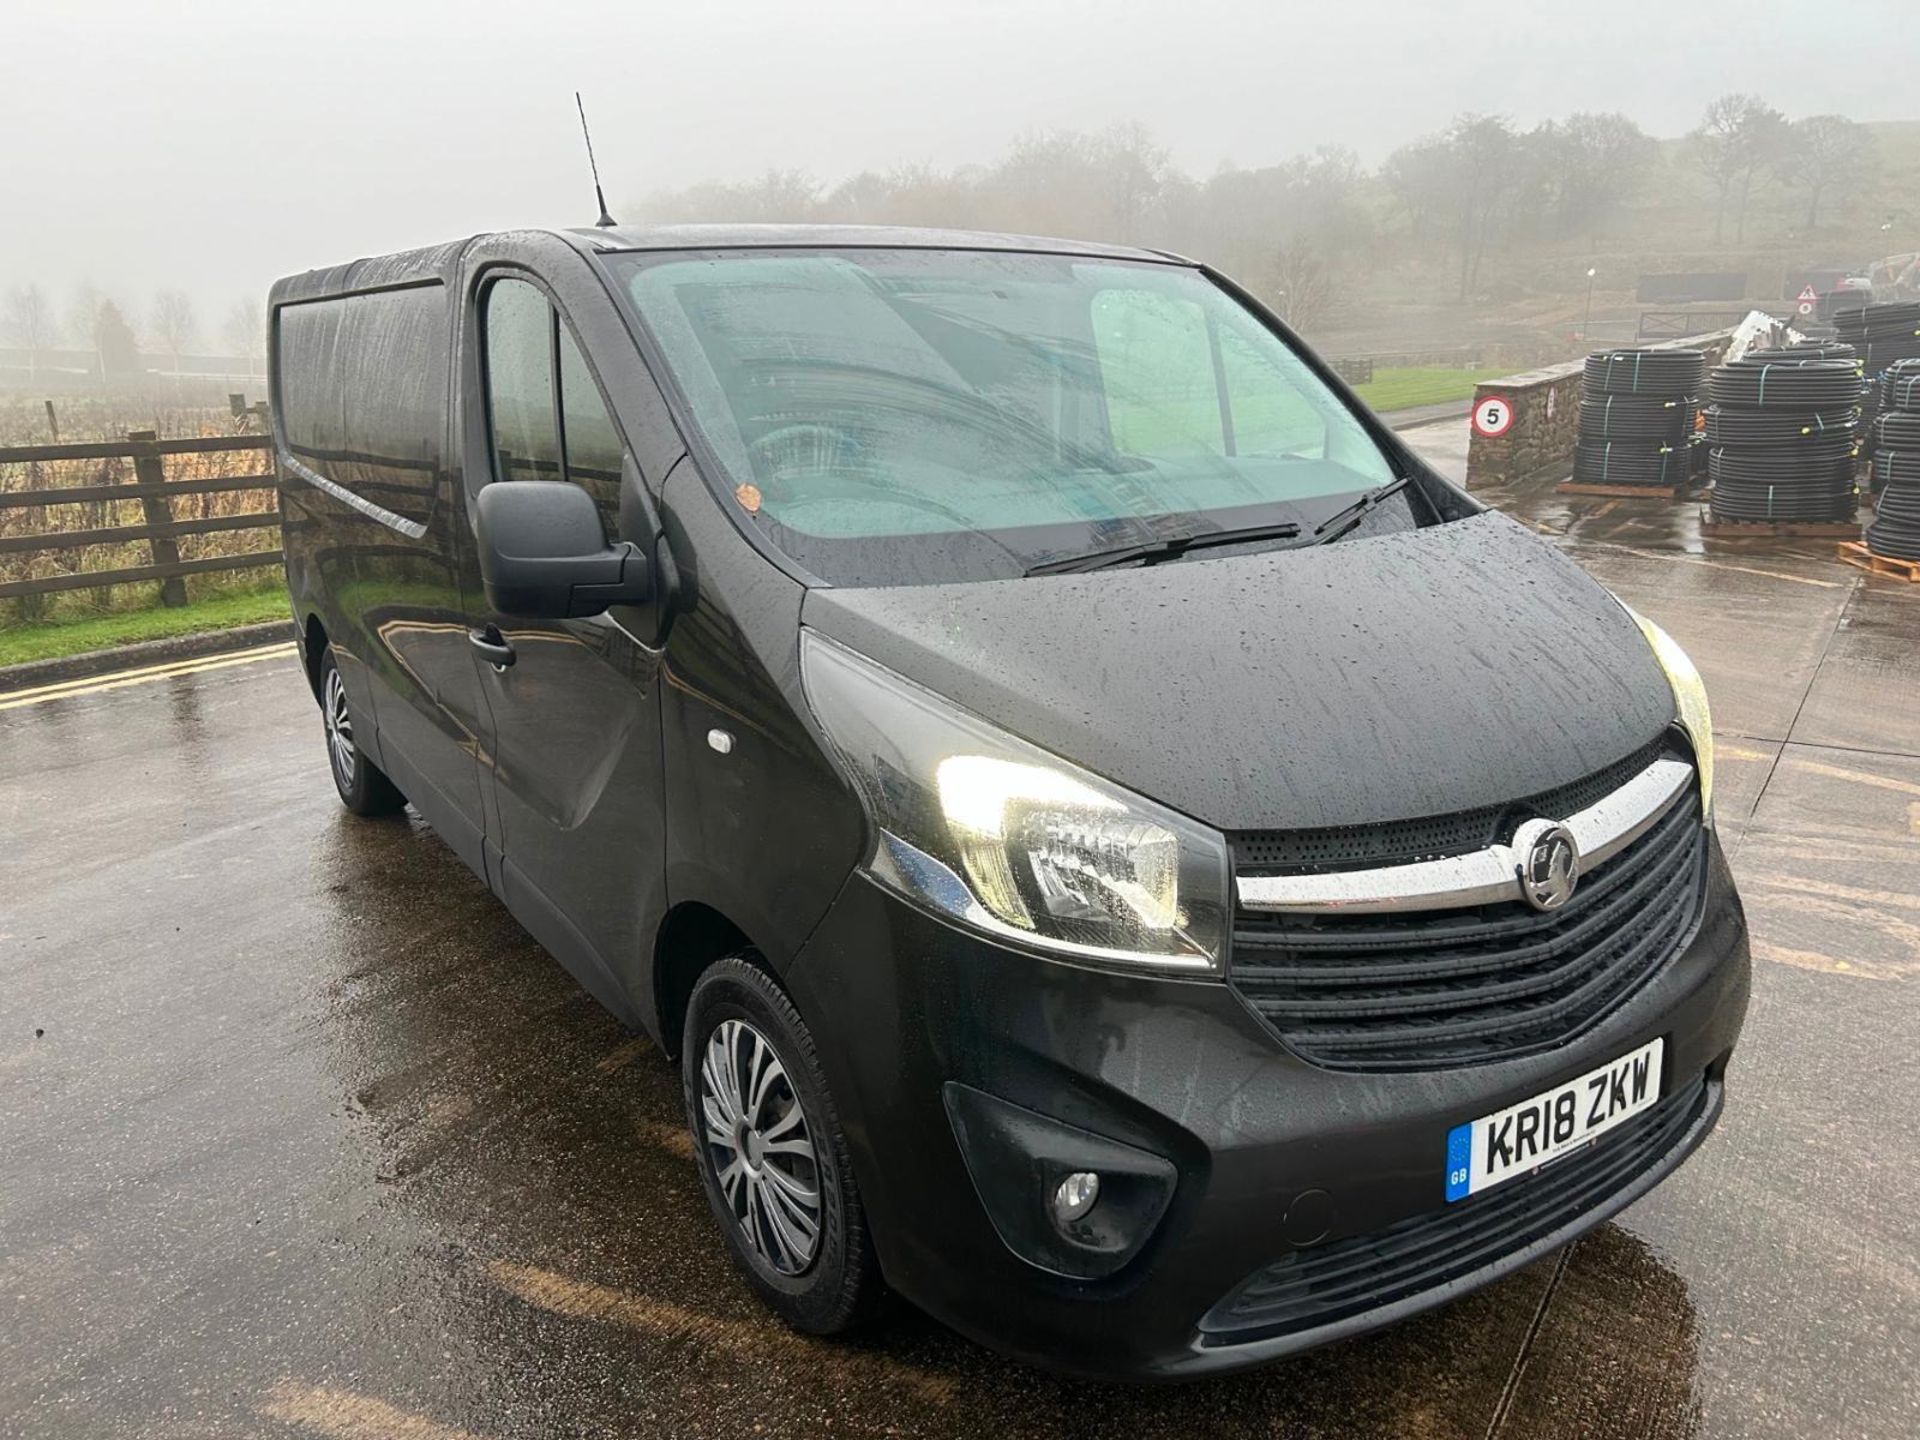 2018 VAUXHALL VIVARO SPORTIVE - 152K MILES- HPI CLEAR- READY FOR ACTION! - Image 10 of 10